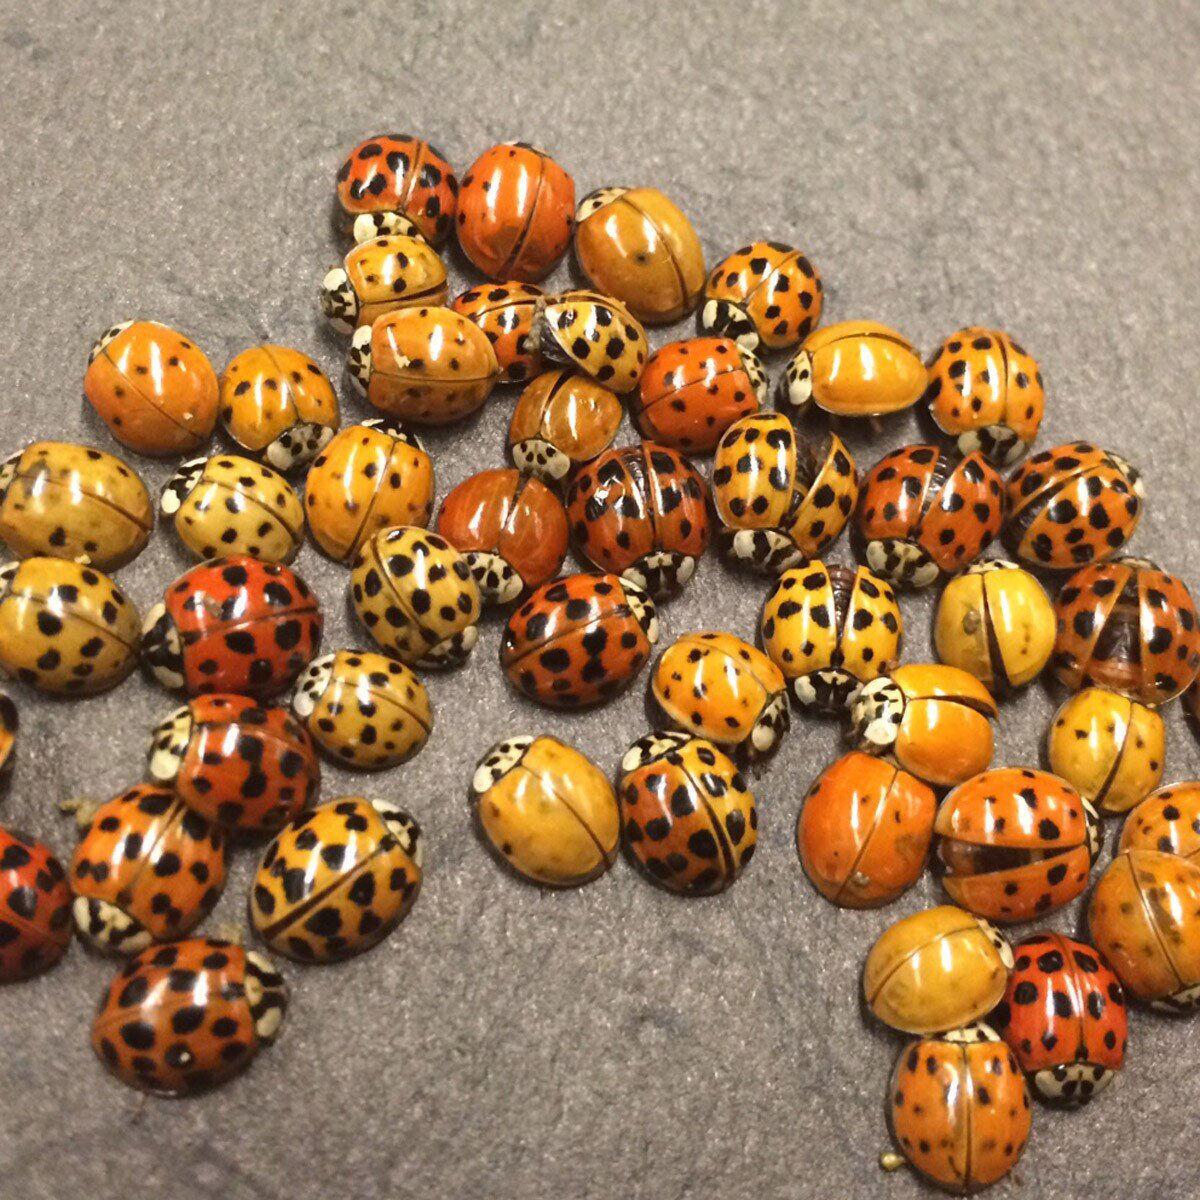 What's with all the ladybugs?